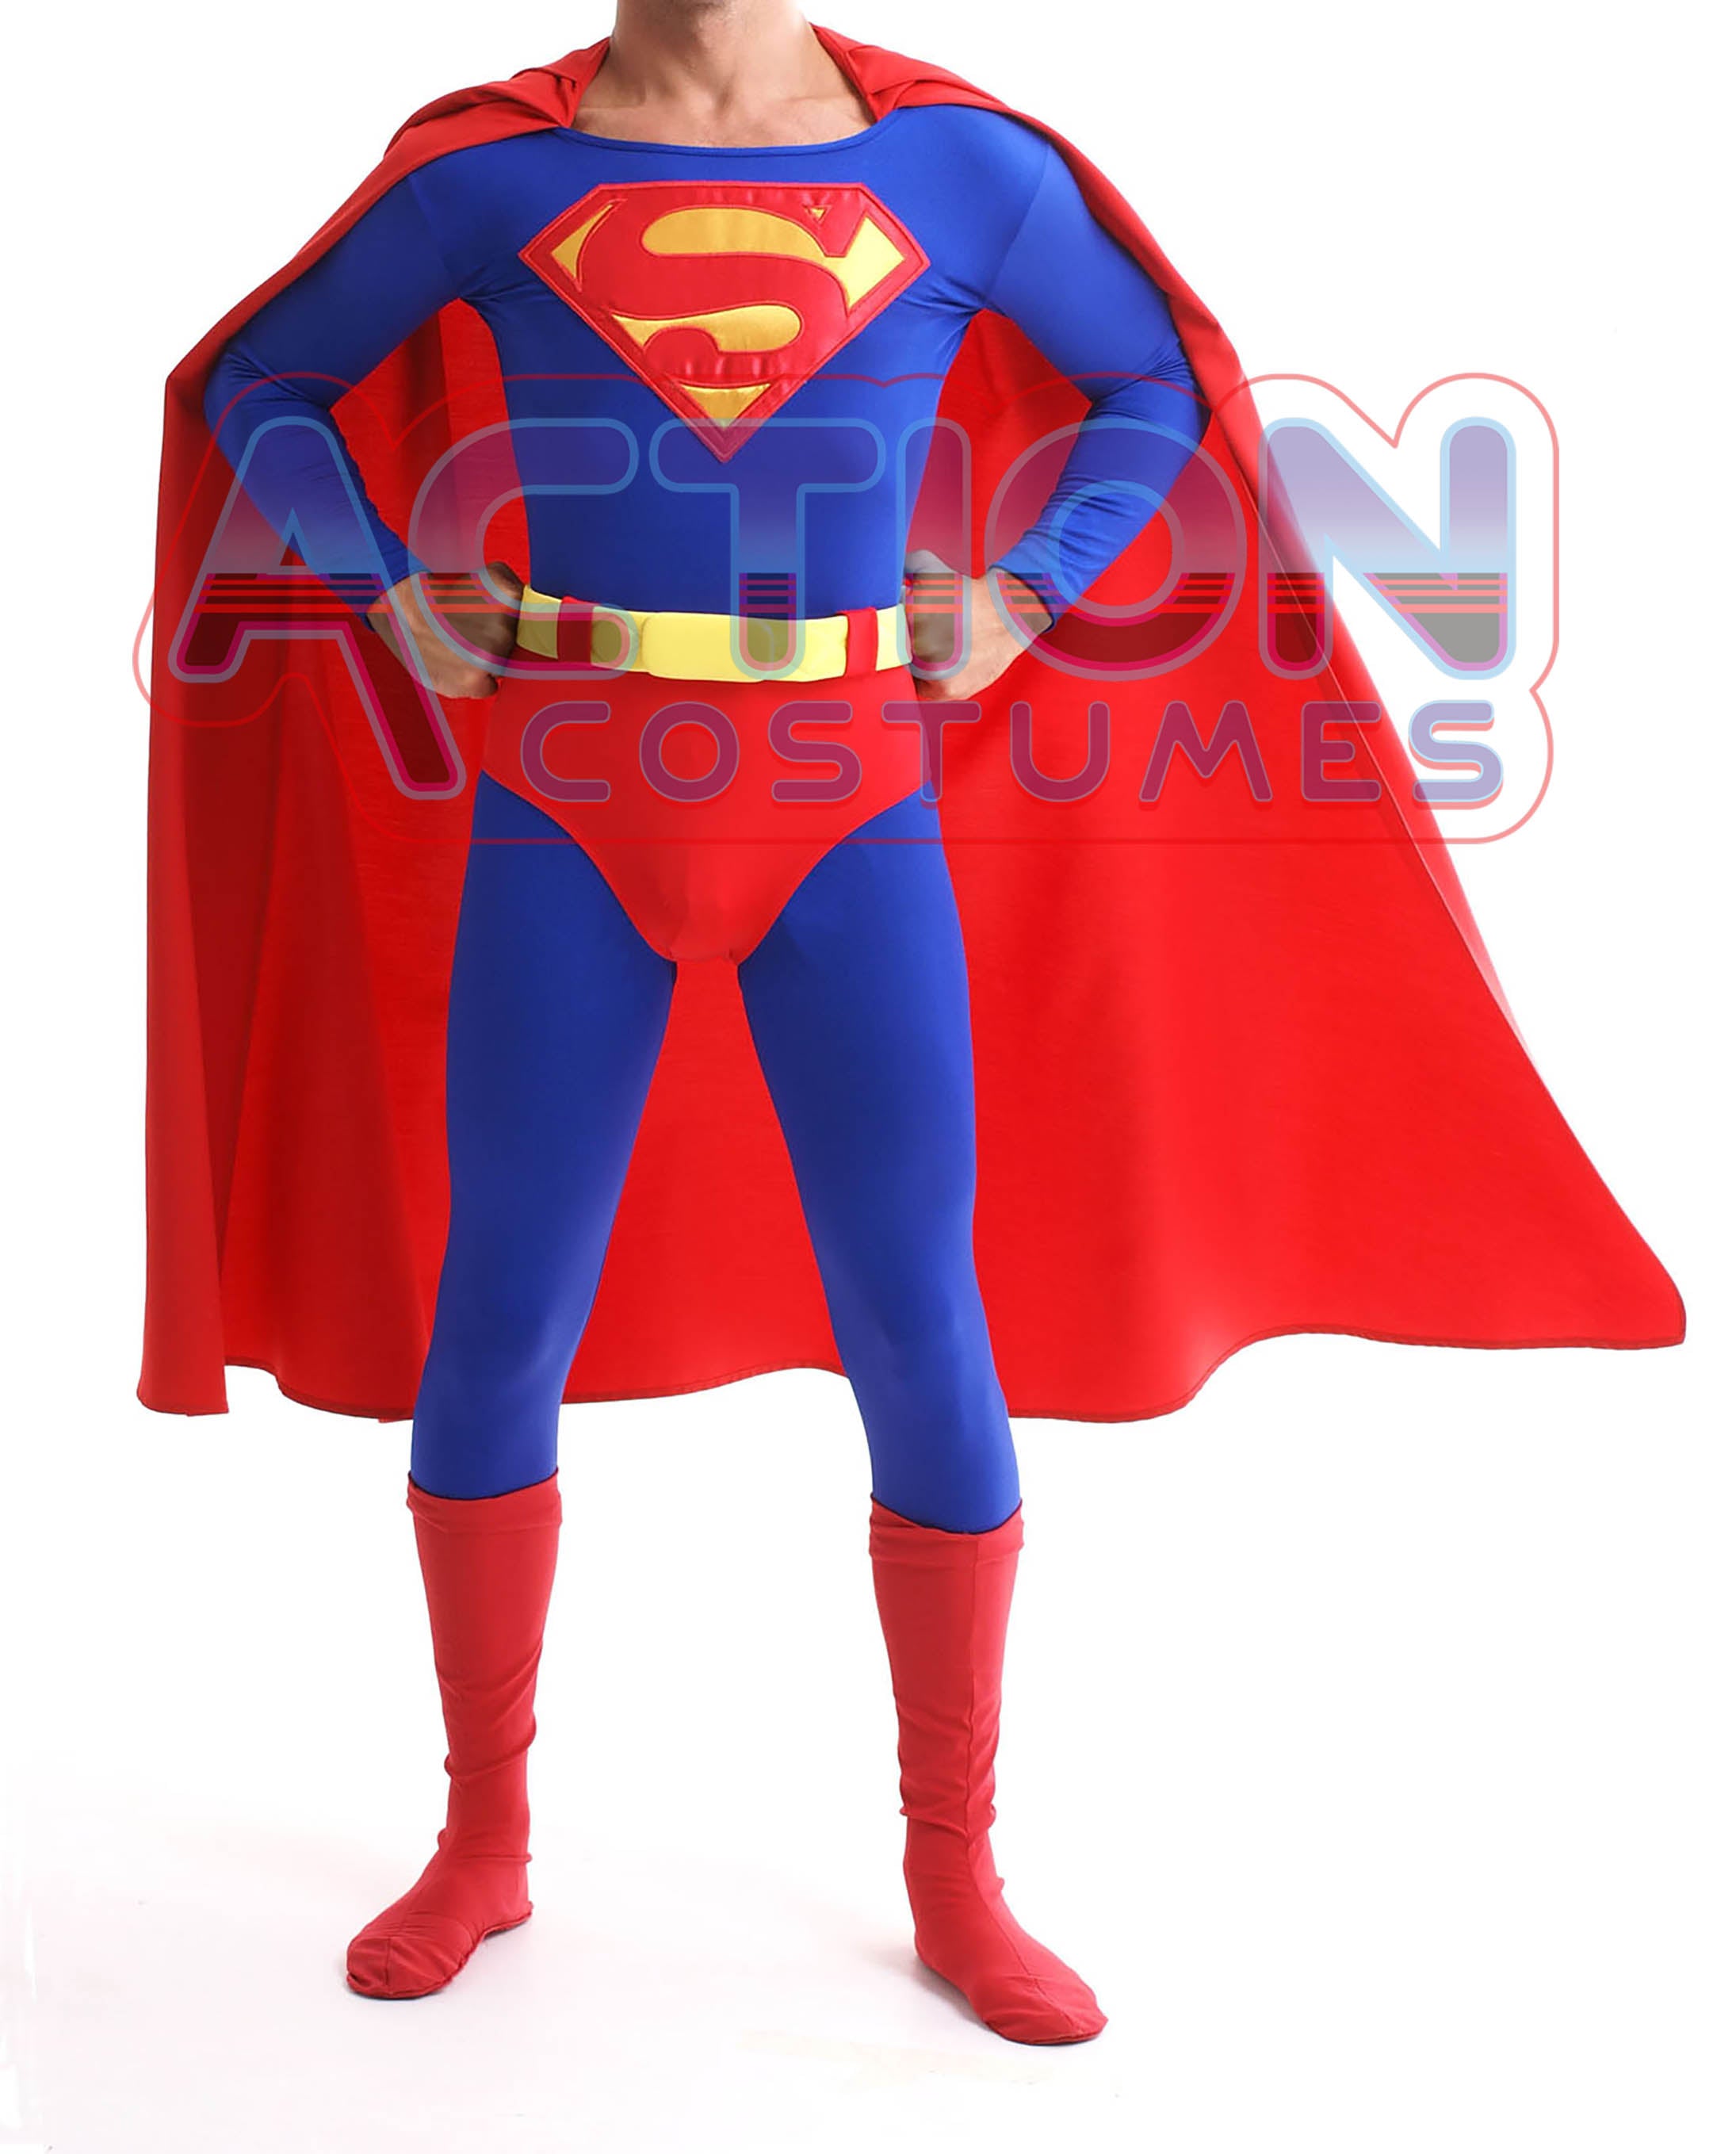 superman-deluxe-costume-90-s-style-m-size-ready-to-ship